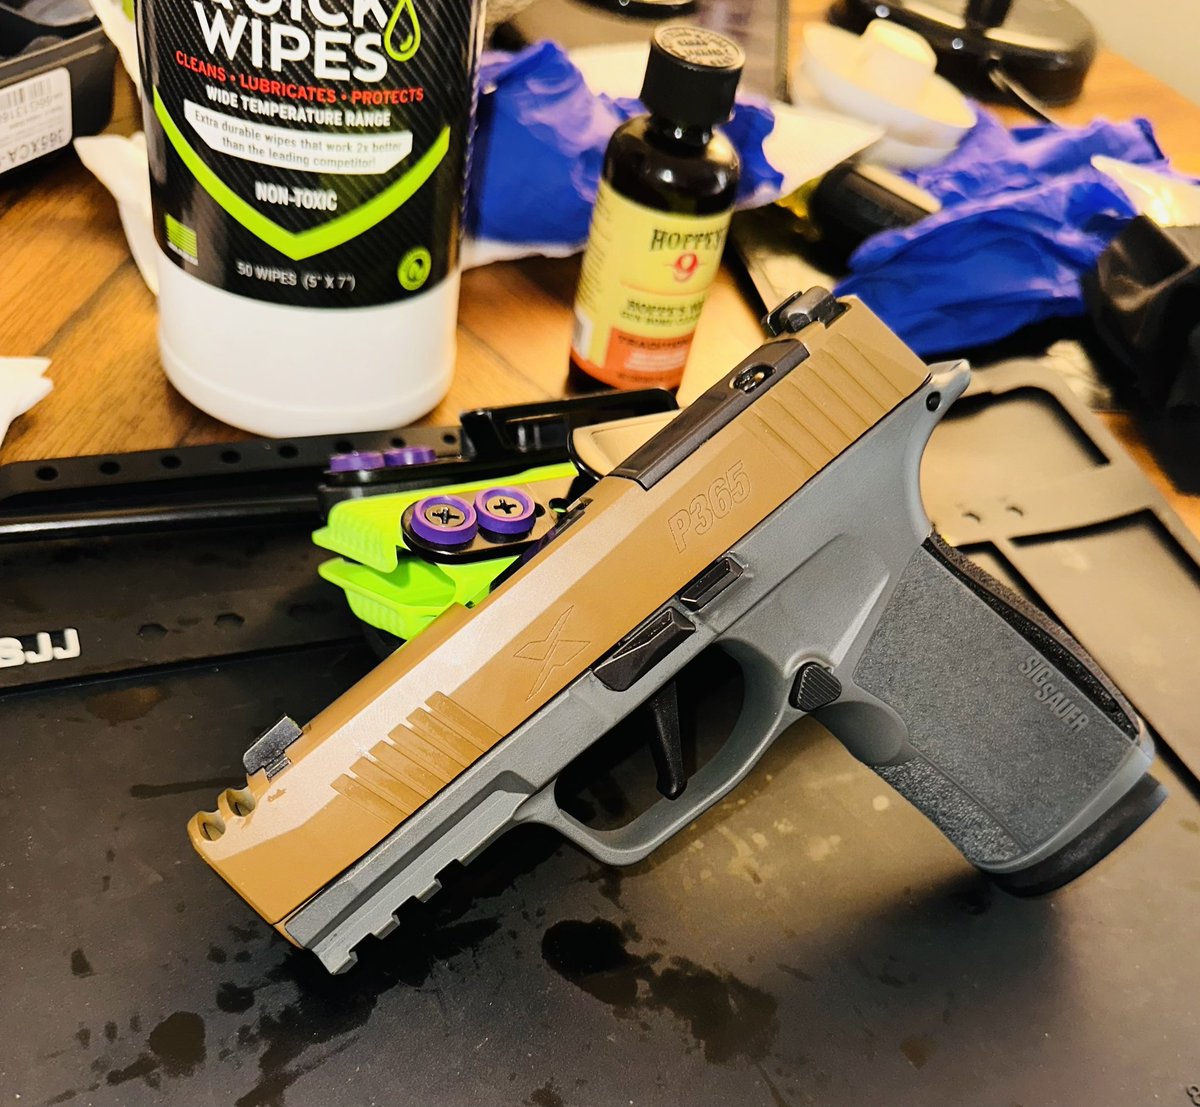 P365 X-Marco Comp with FDE/Gray cerakote from X-werks…oiled and ready 😍